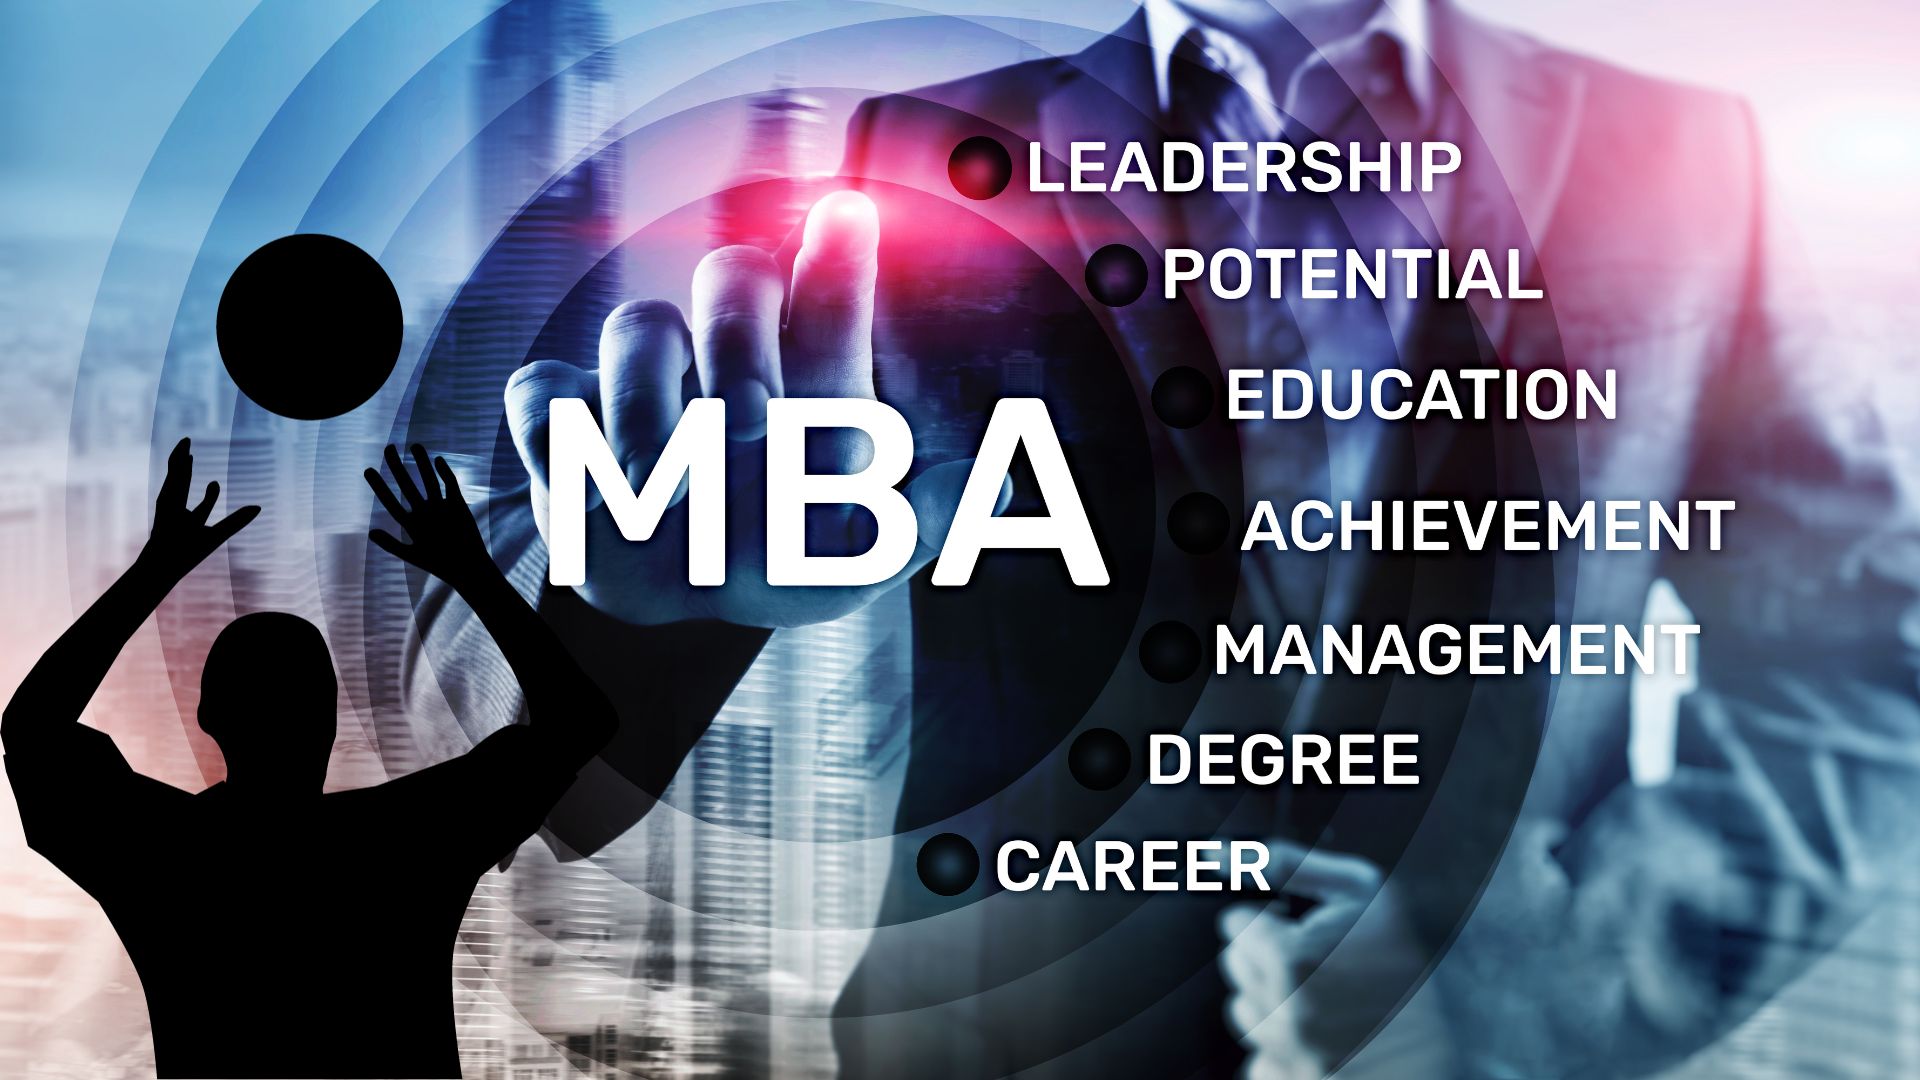 If I Want to Work in Sports Marketing, Should I Pursue an MBA in Marketing  or a Sports Management MBA?